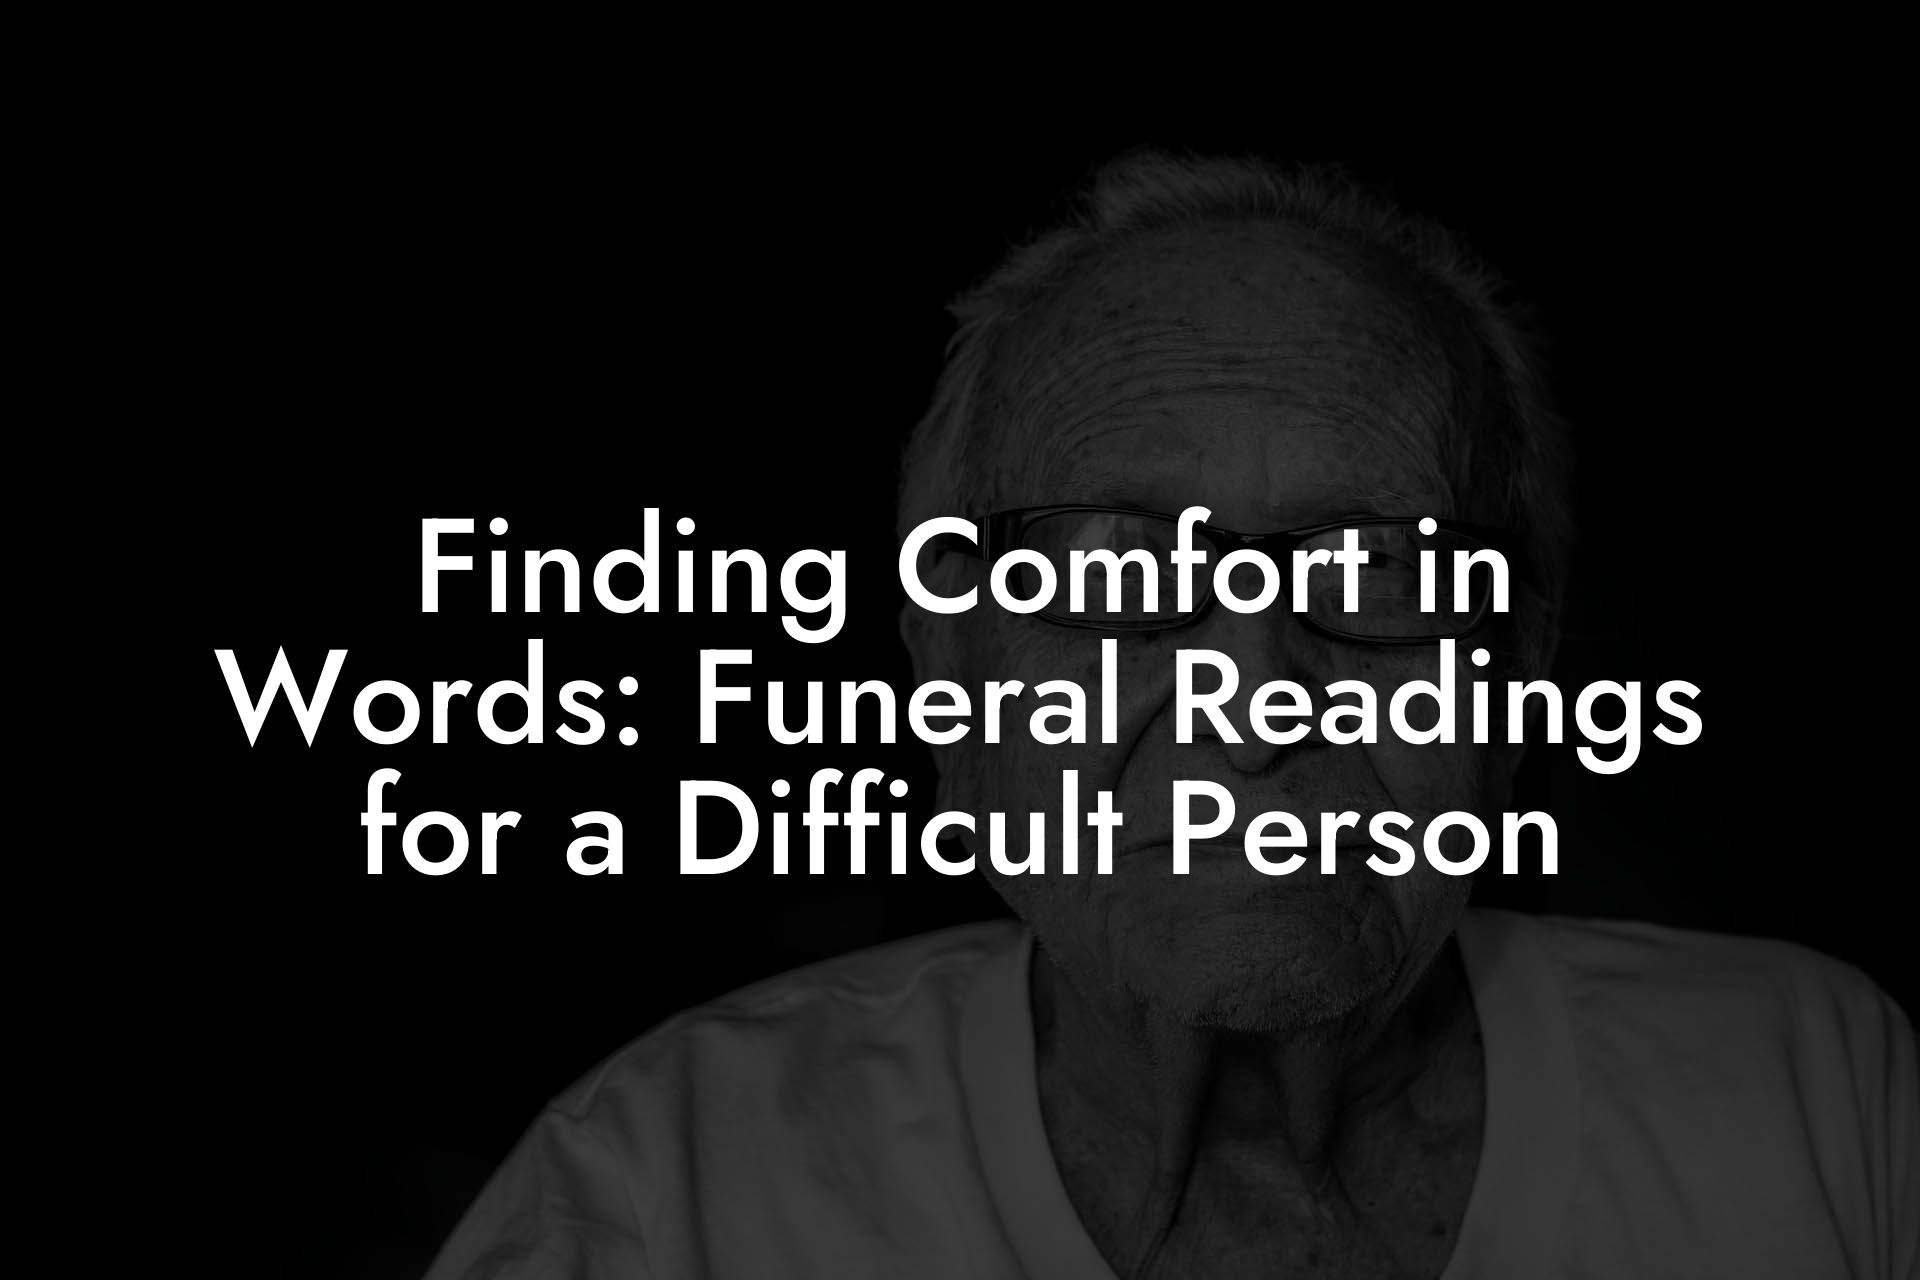 Finding Comfort in Words: Funeral Readings for a Difficult Person